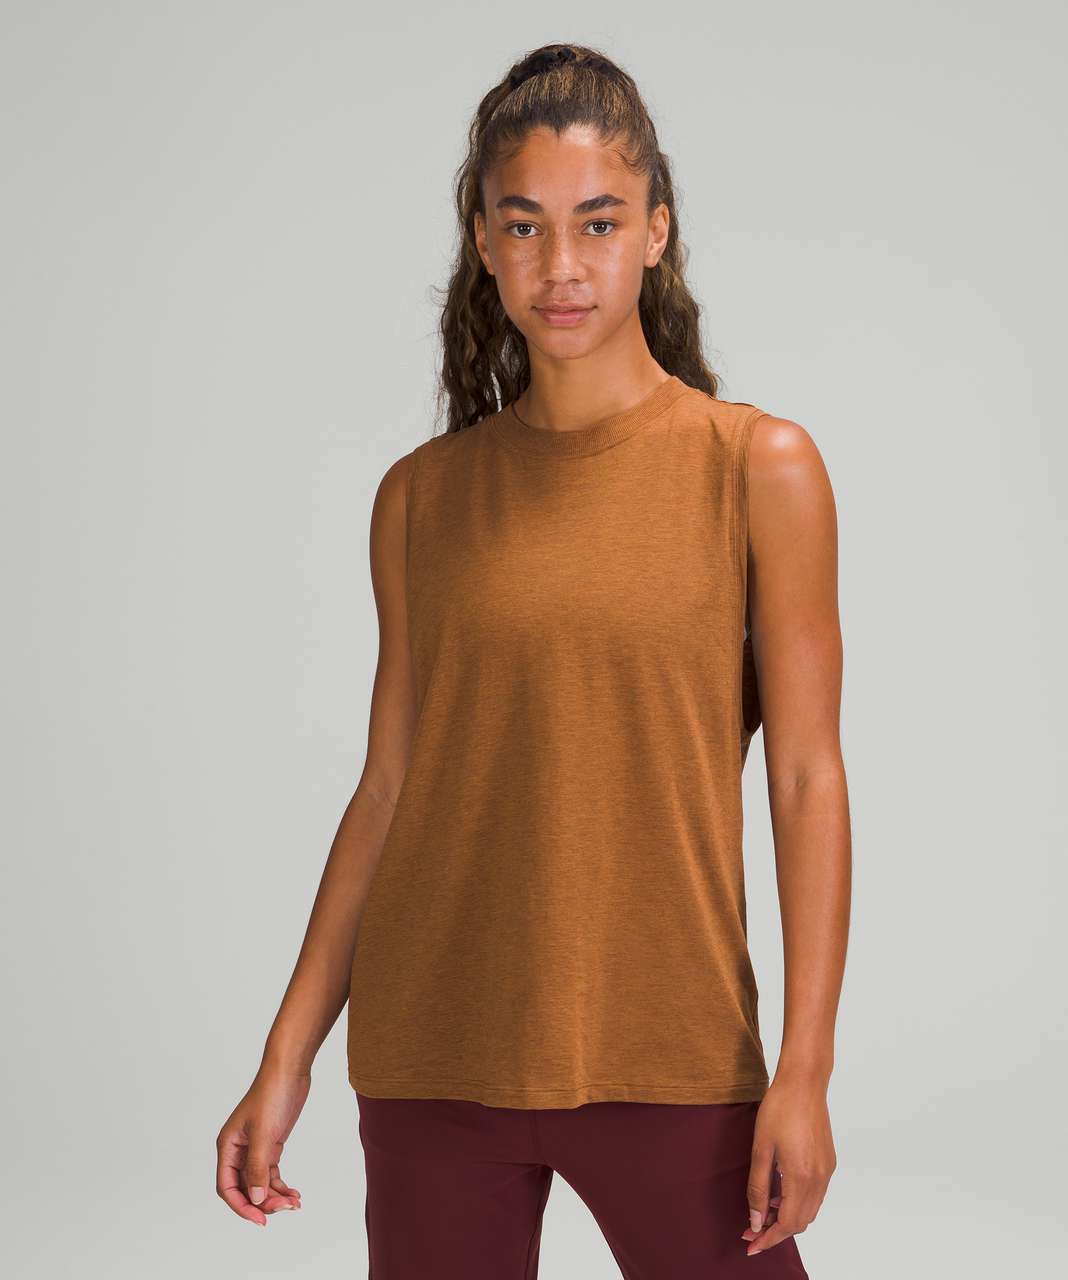 Lululemon All Yours Tank Top - Heathered Copper Brown